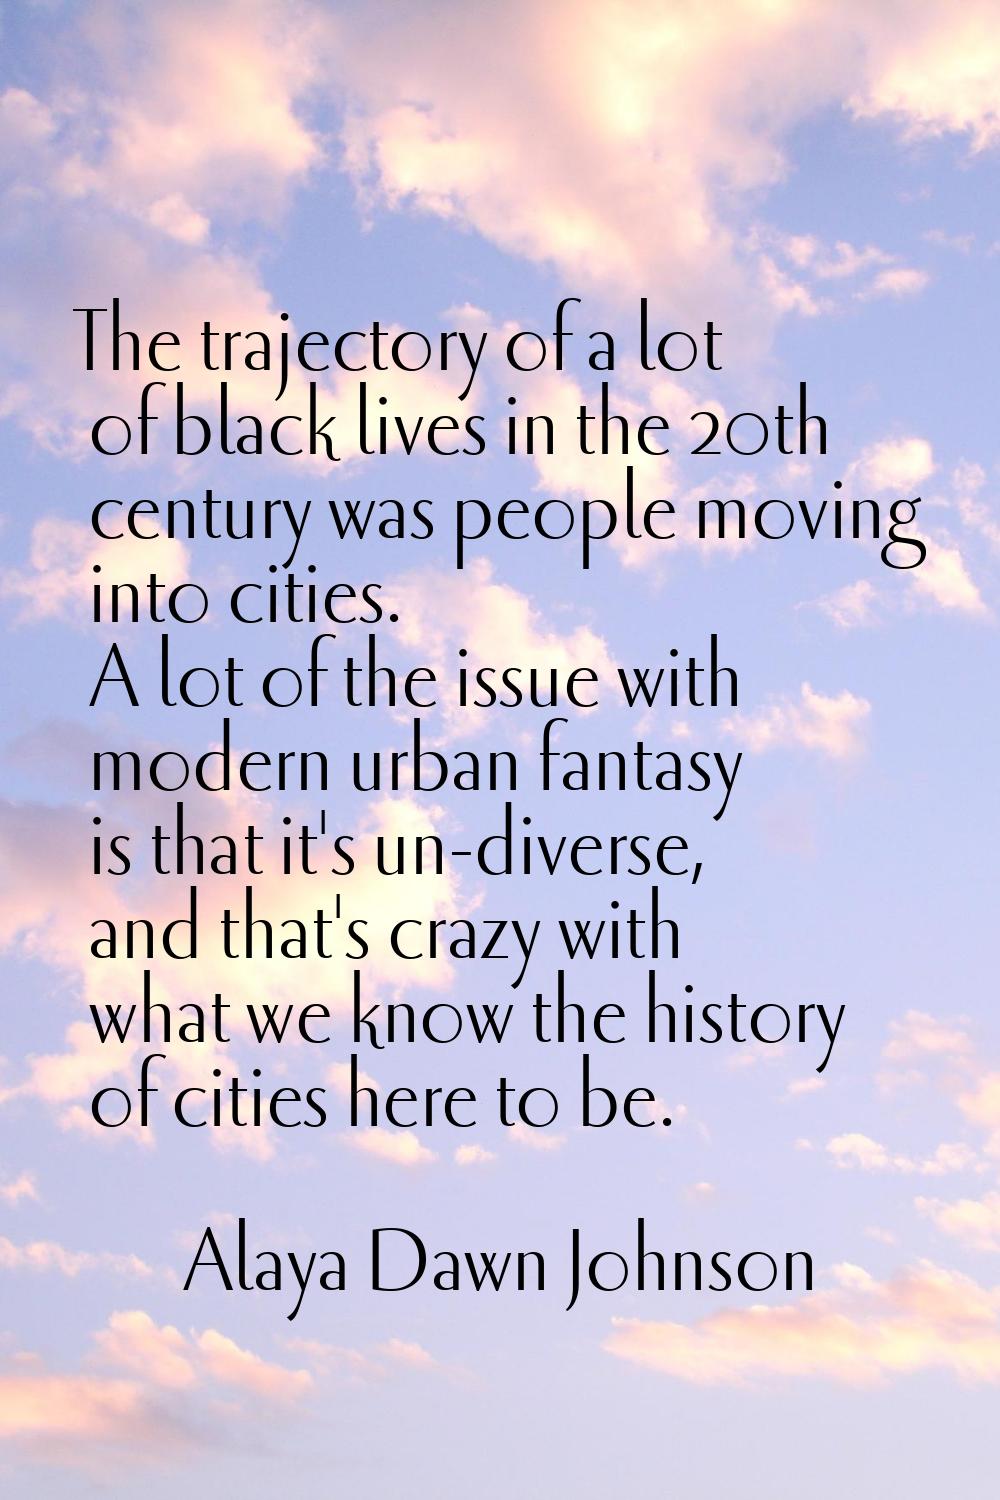 The trajectory of a lot of black lives in the 20th century was people moving into cities. A lot of 